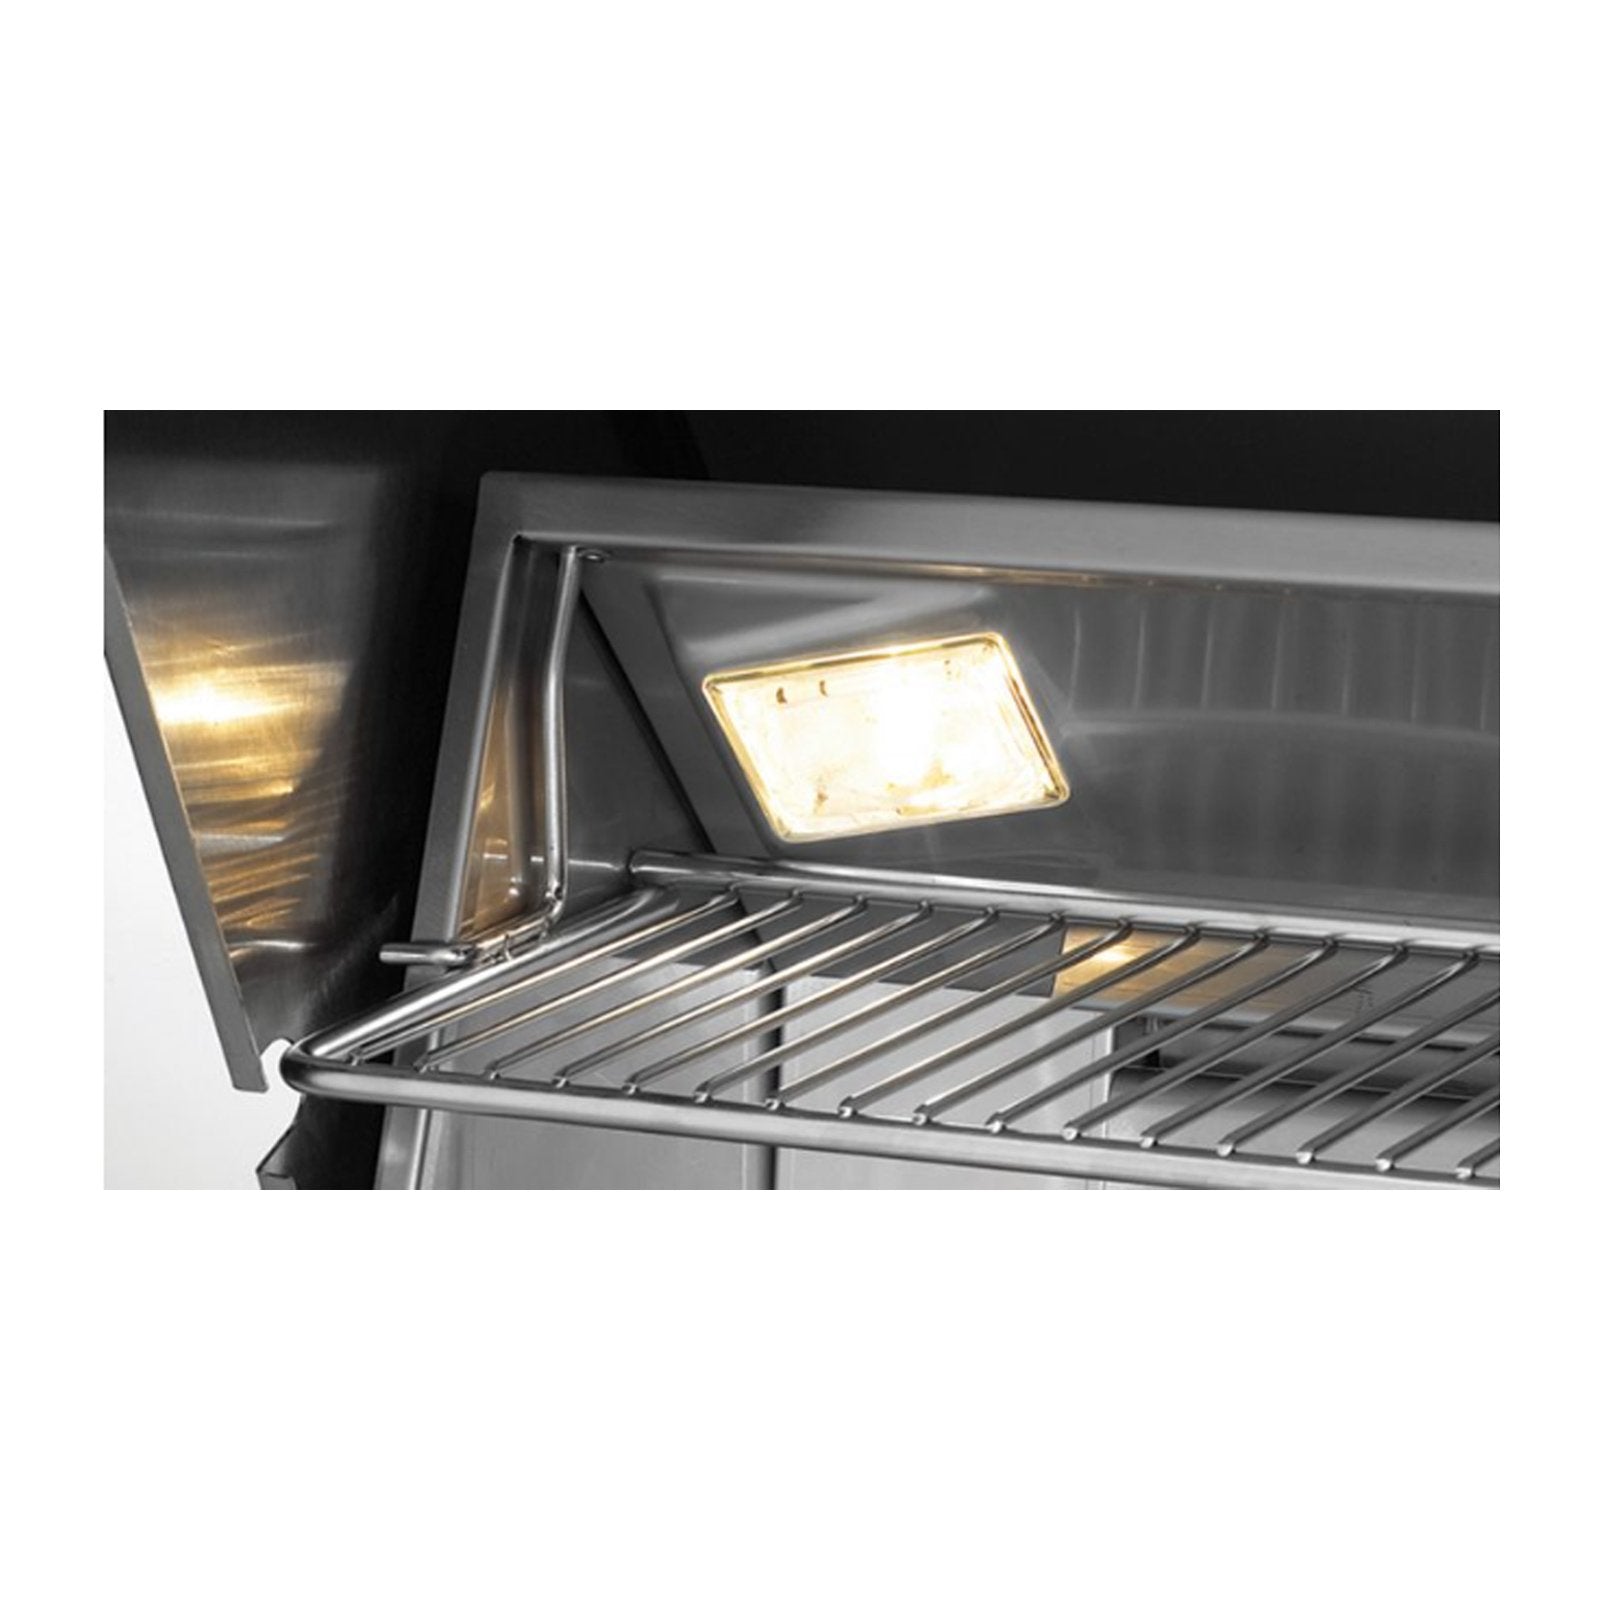 fire-magic-24-a430i-built-in-grill-w-infra-burner-analog-thermometer 7